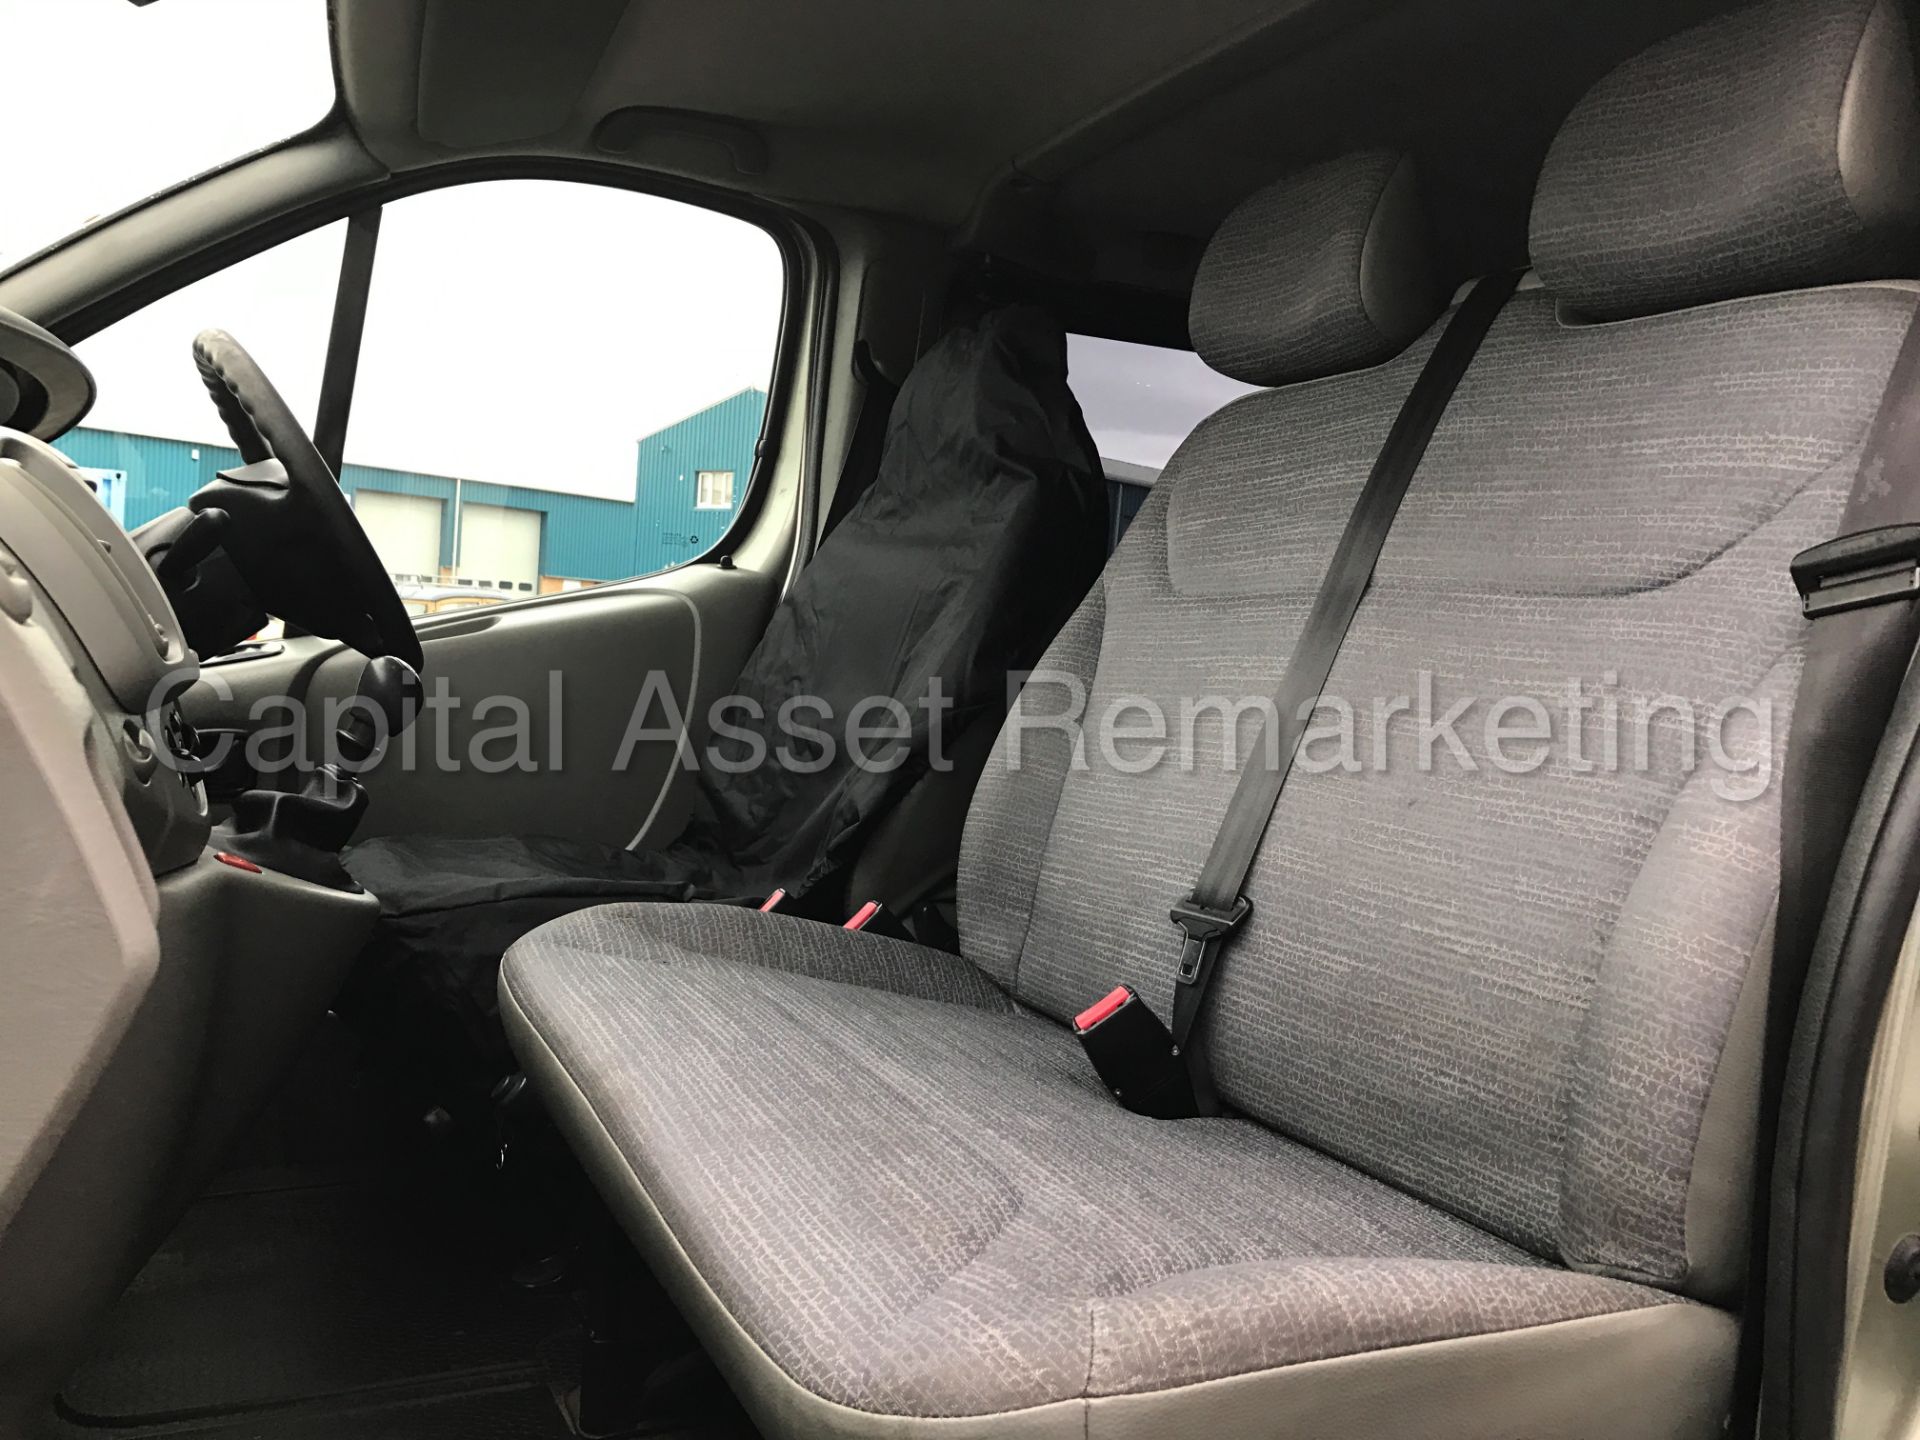 RENAULT TRAFIC SL29 '9 SEATER BUS' (2007) '1.9 DCI - 115 PS - 6 SPEED - A/C' (NO VAT - SAVE 20%) - Image 21 of 26